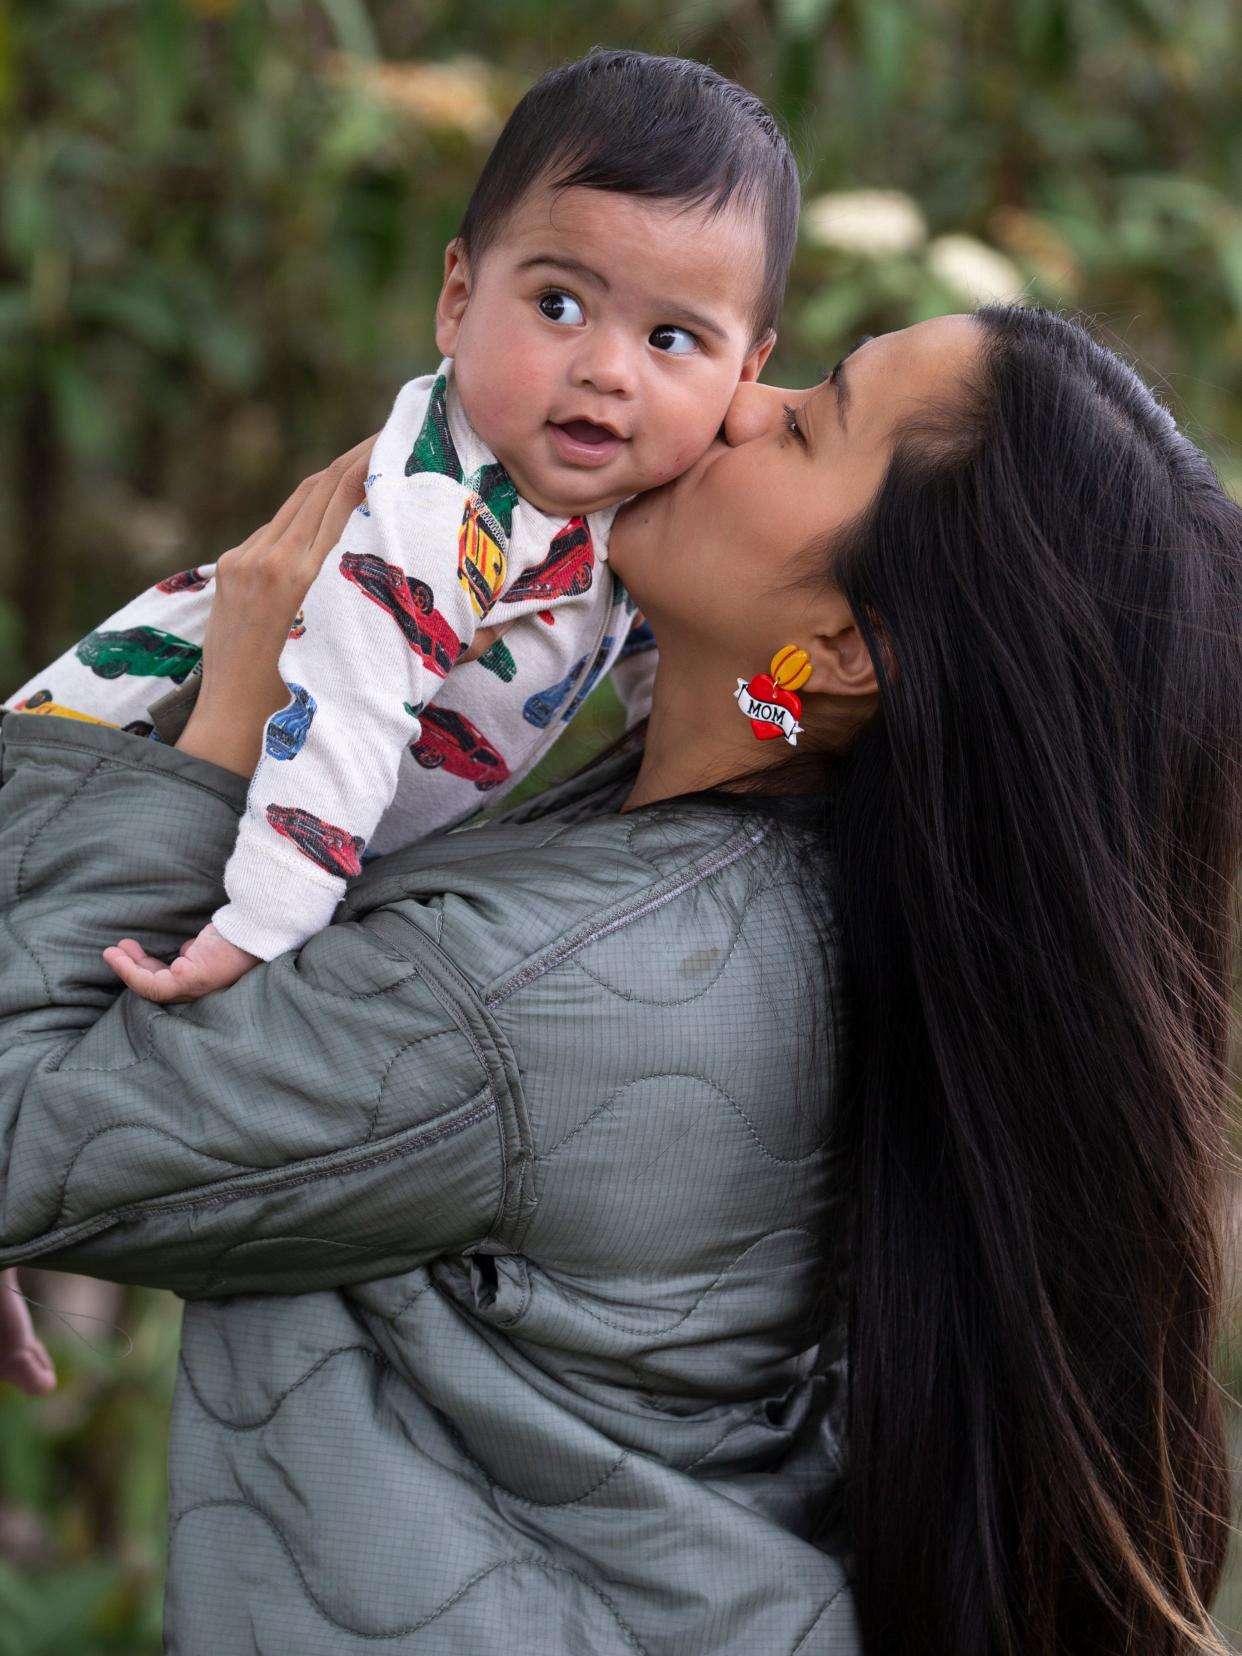 Clarisse Mendoza of Bradley Beach and her baby Rafael Martinez, who is 6 months old. They attend group therapy sessions at the Perinatal Mood & Anxiety Disorders Center for postpartum depression.
Eatontown, NJ
Thursday, May 9, 2024